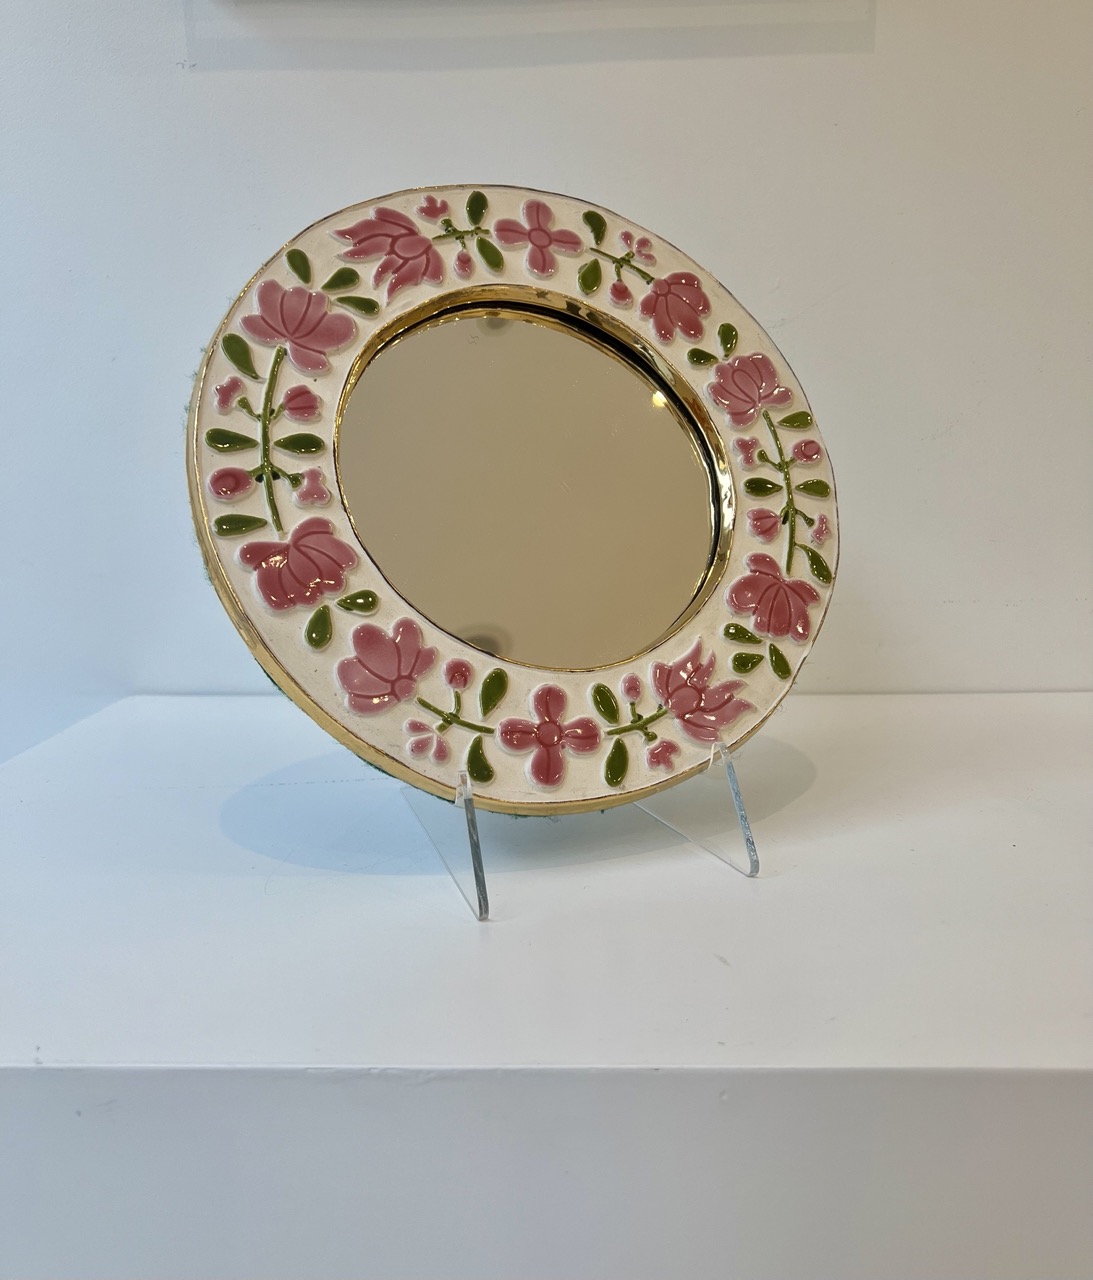 A graceful floral mirror by Mithé Espelt, titled Romantic. One can observe the fine glazes of Mithé Espelt and the trace of her hand on the golden rim.